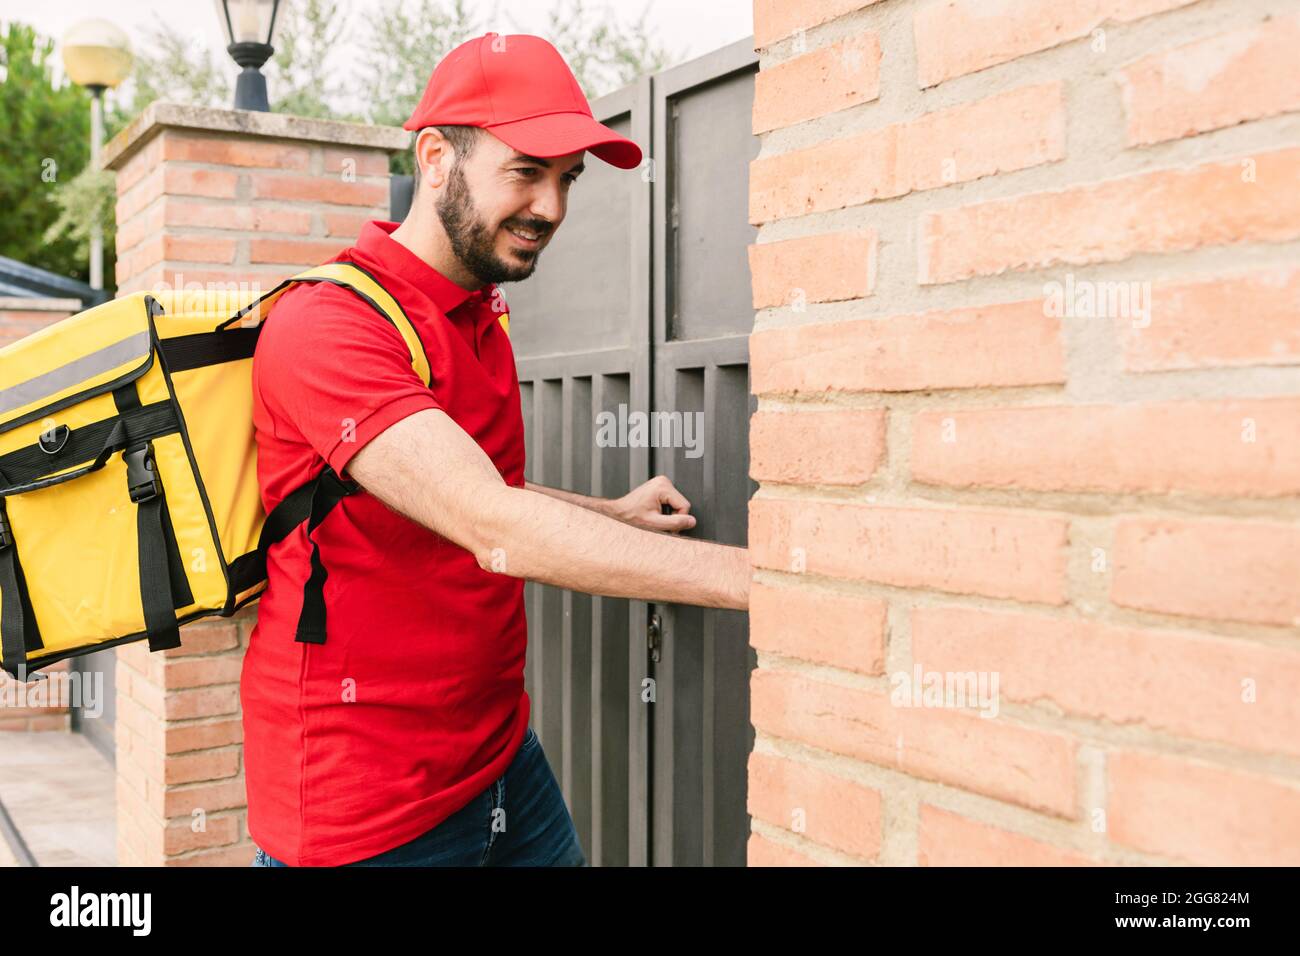 Hispanic delivery man in red uniform ringing the bell to delivery packages - Deliver service and small business concept Stock Photo